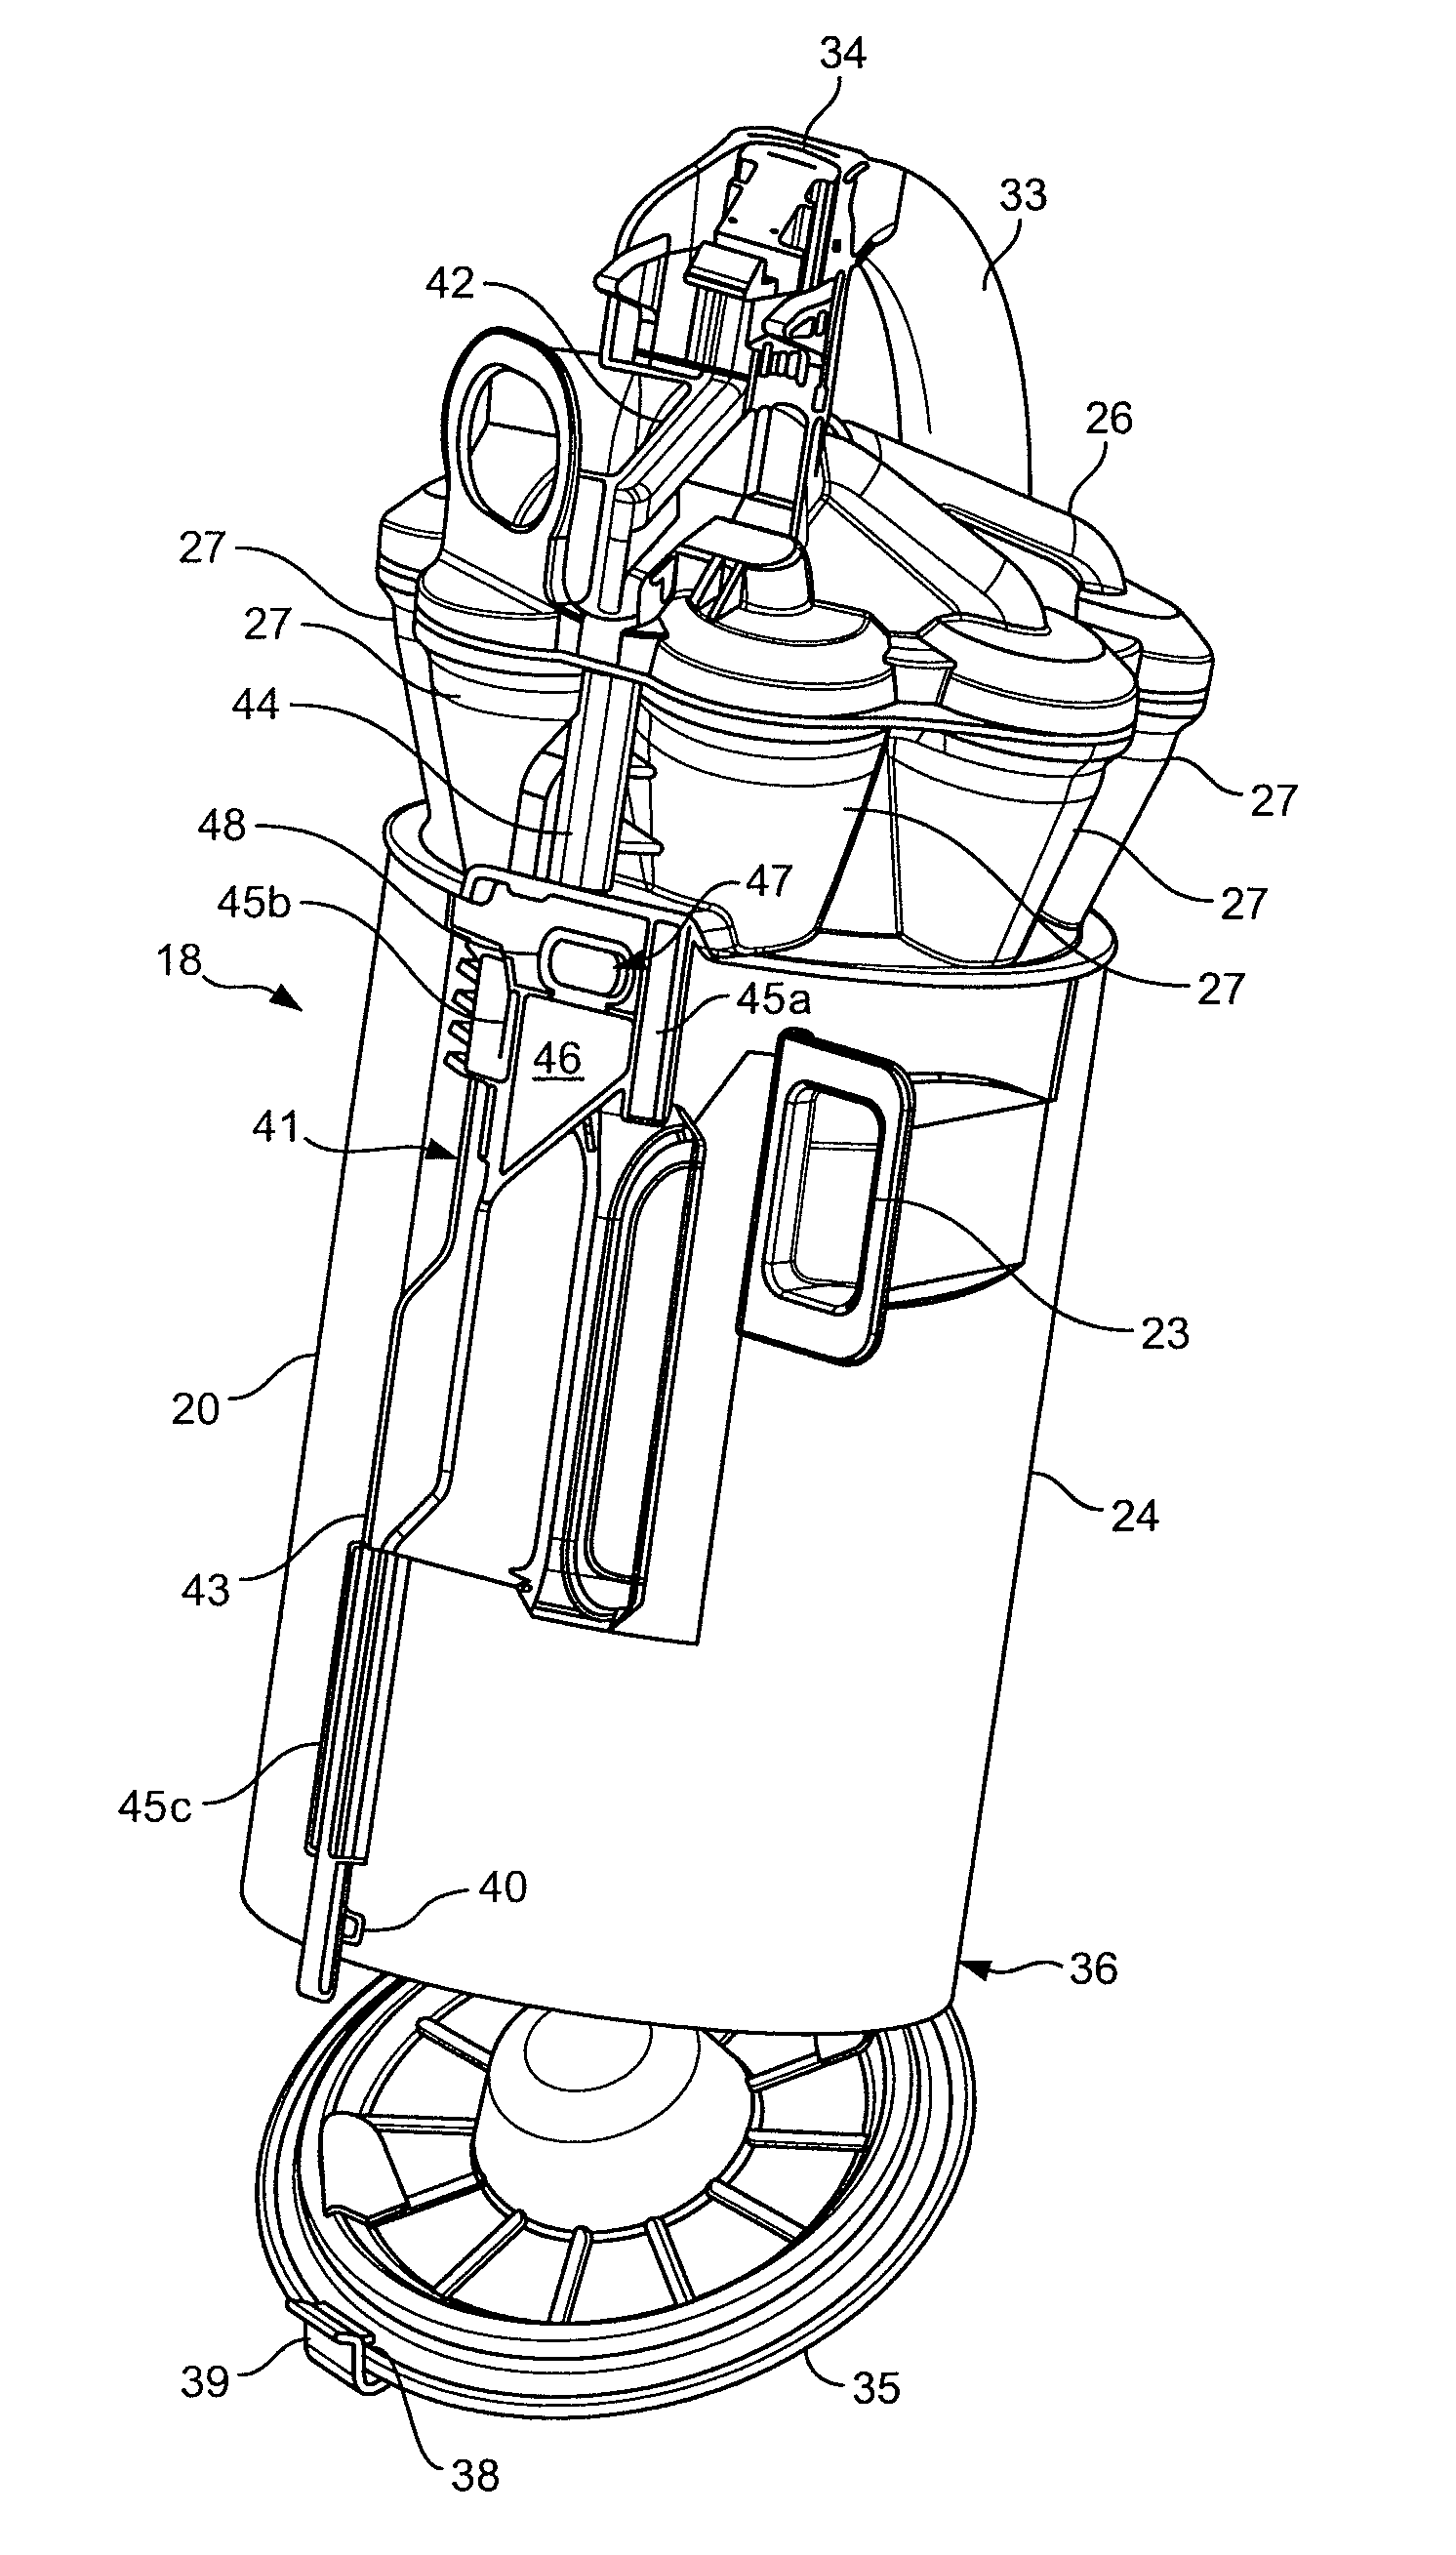 Separating apparatus for a cleaning appliance